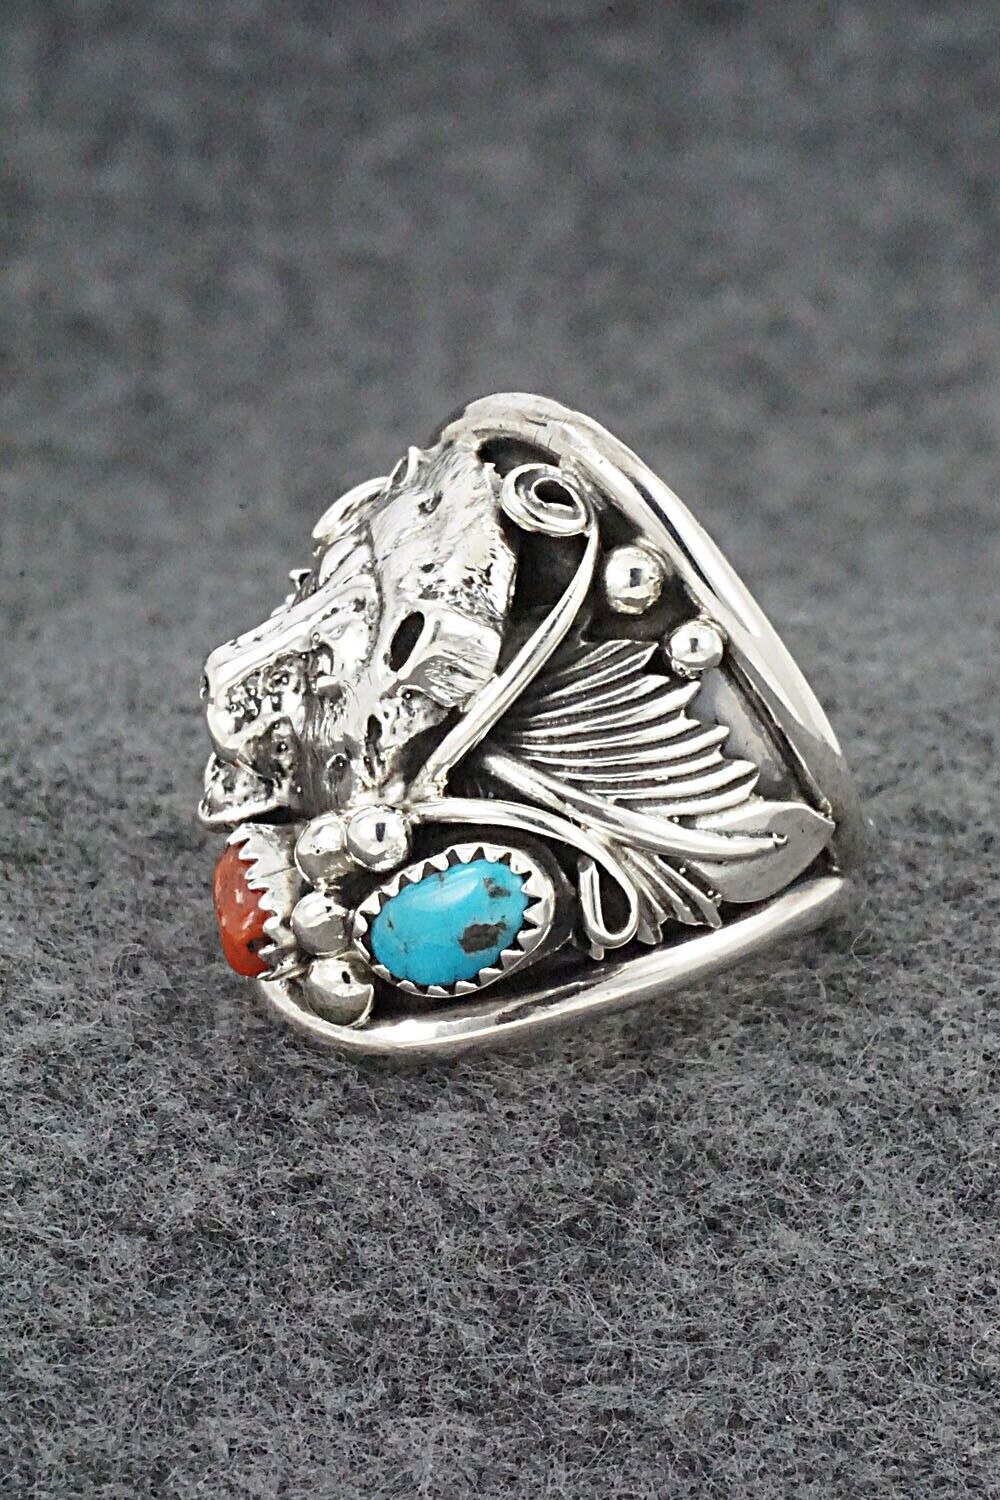 Turquoise, Coral & Sterling Silver Ring - Jeannette Saunders - Size 11.25